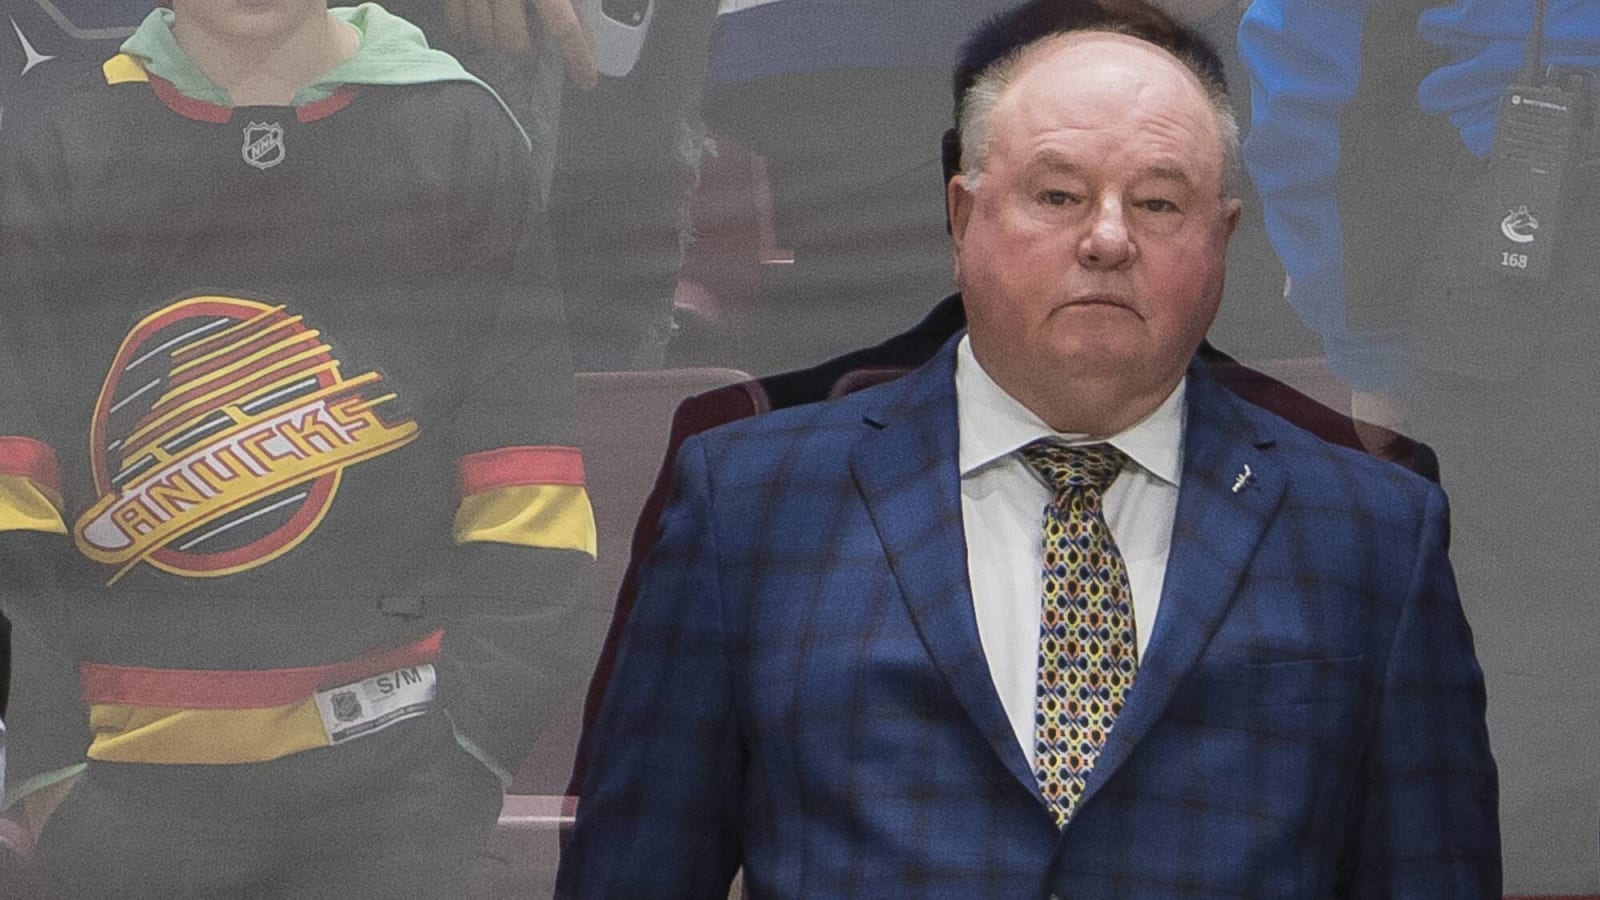 Through the Boudreau fiasco and beyond, the Canucks have sunk below rock bottom